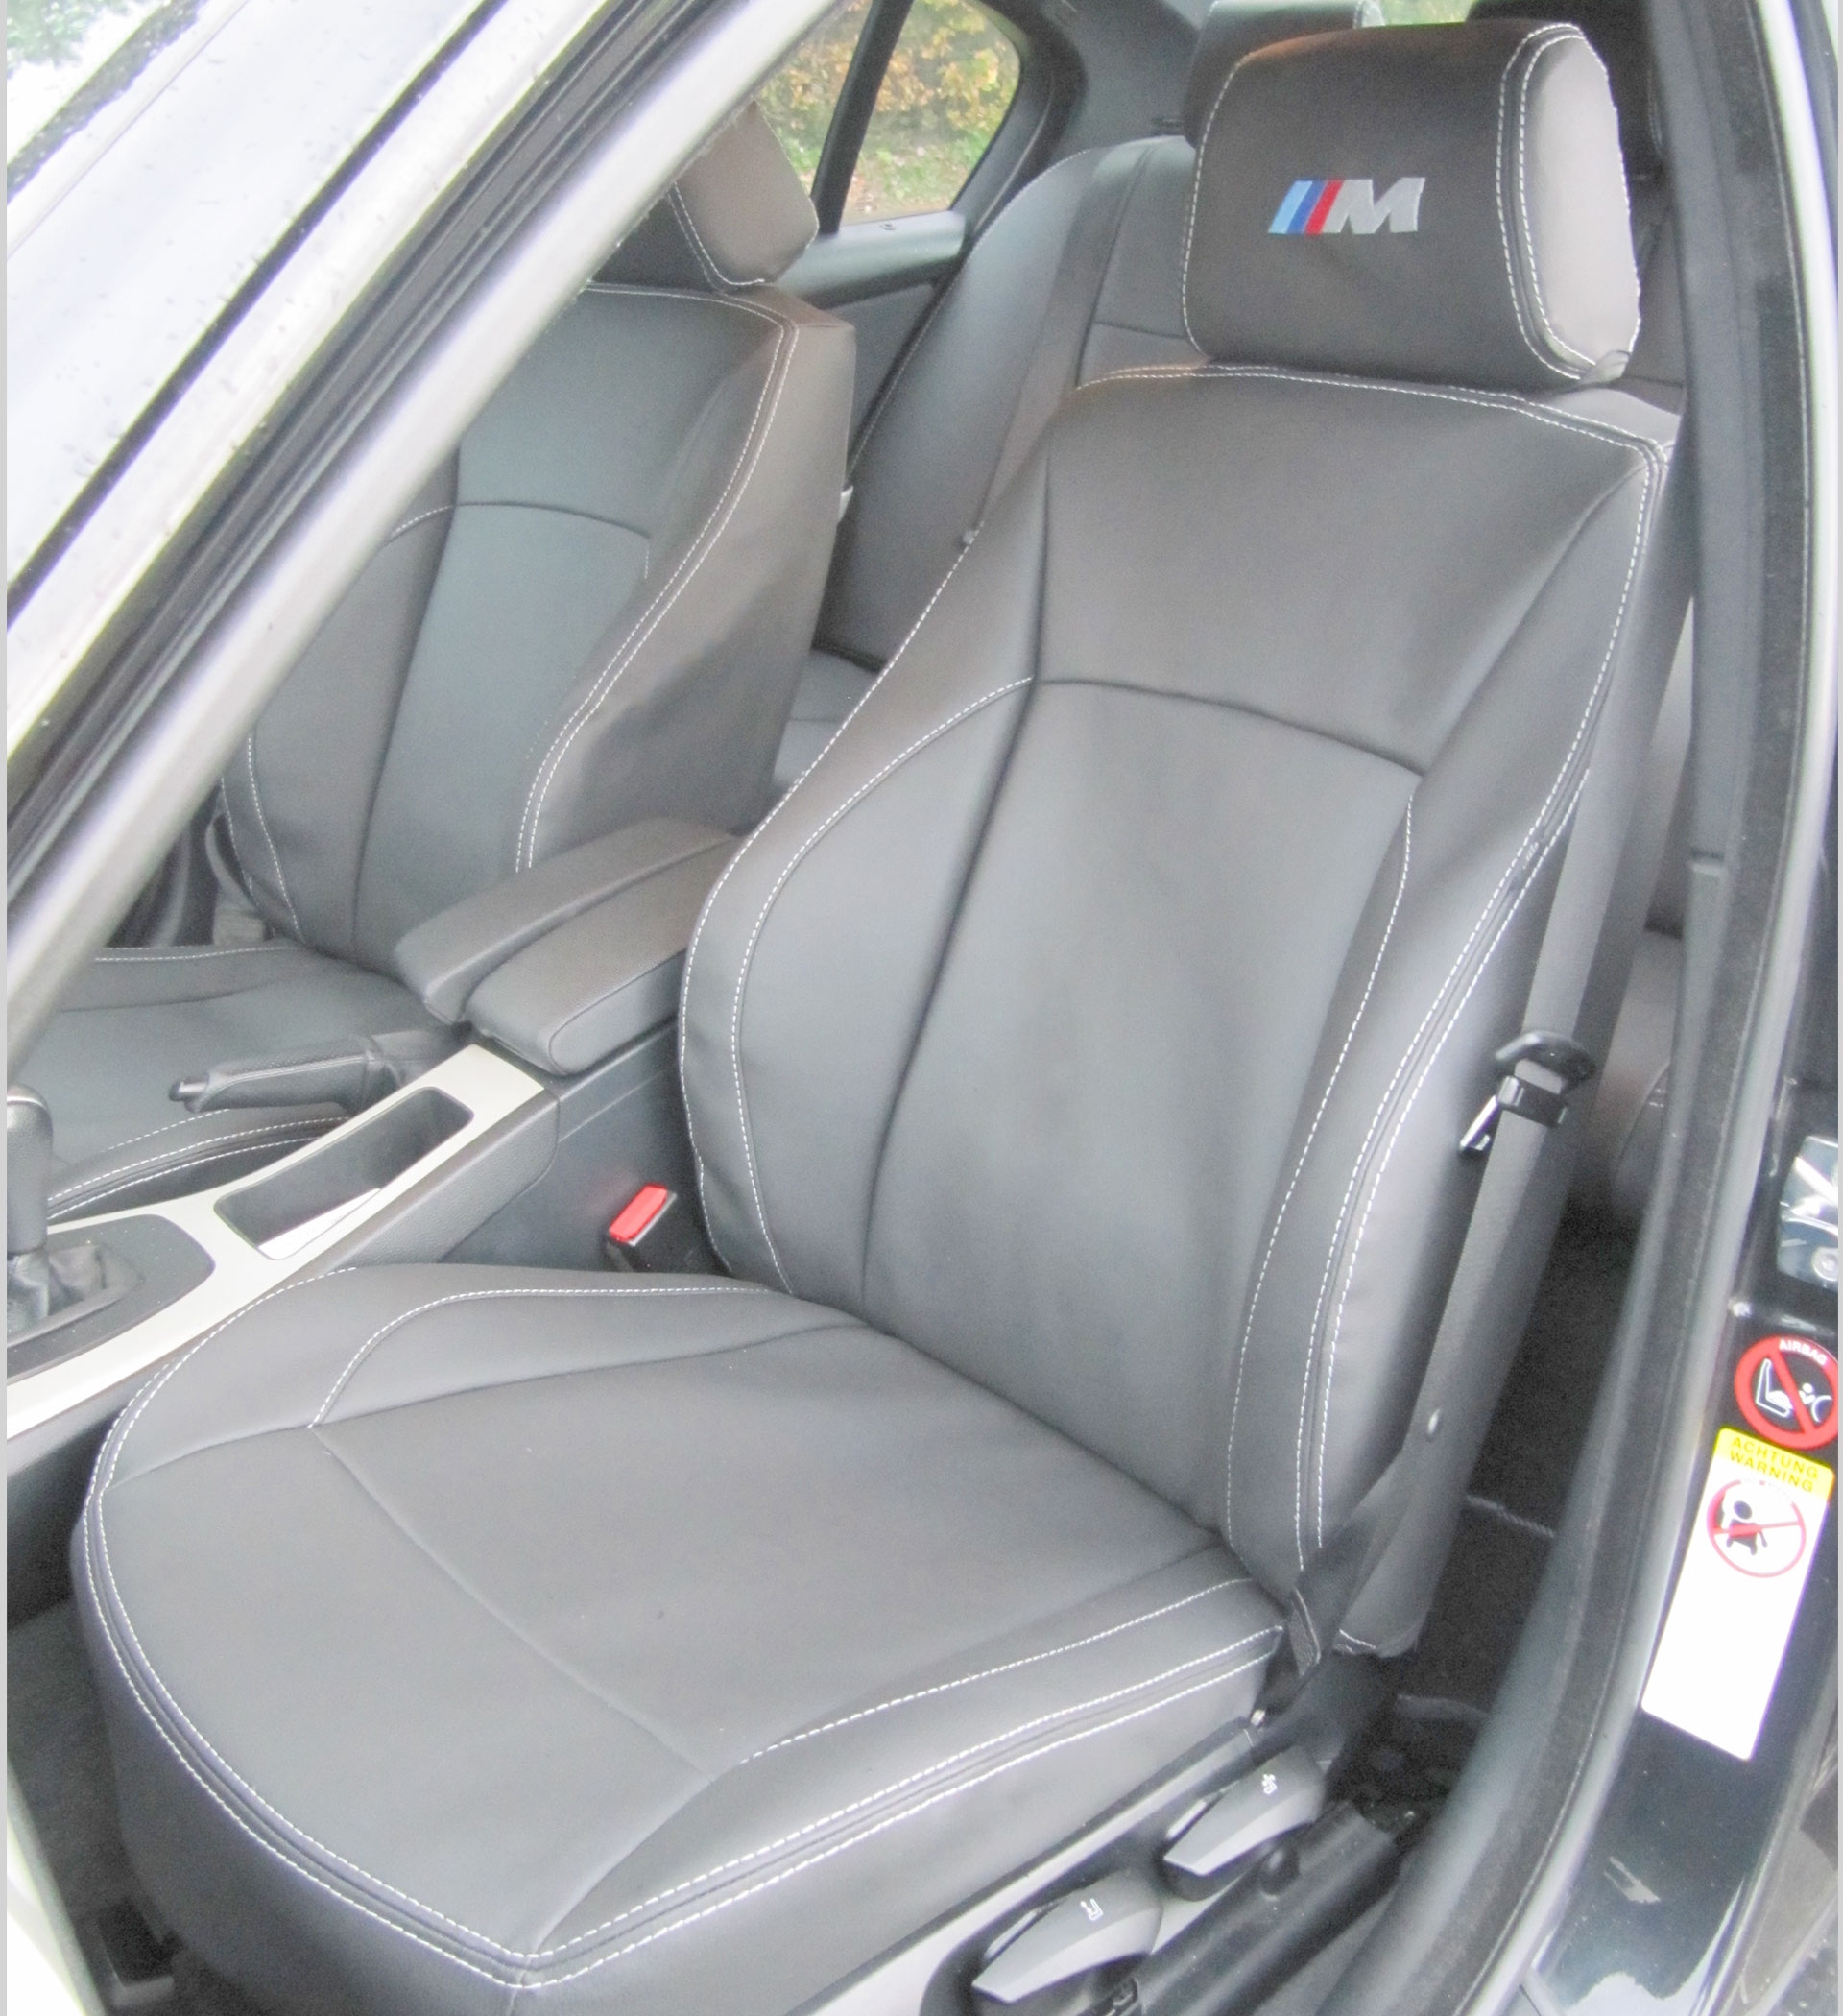 Vauxhall Vivaro Leather Look Double Cab Seat Covers - Charcoal